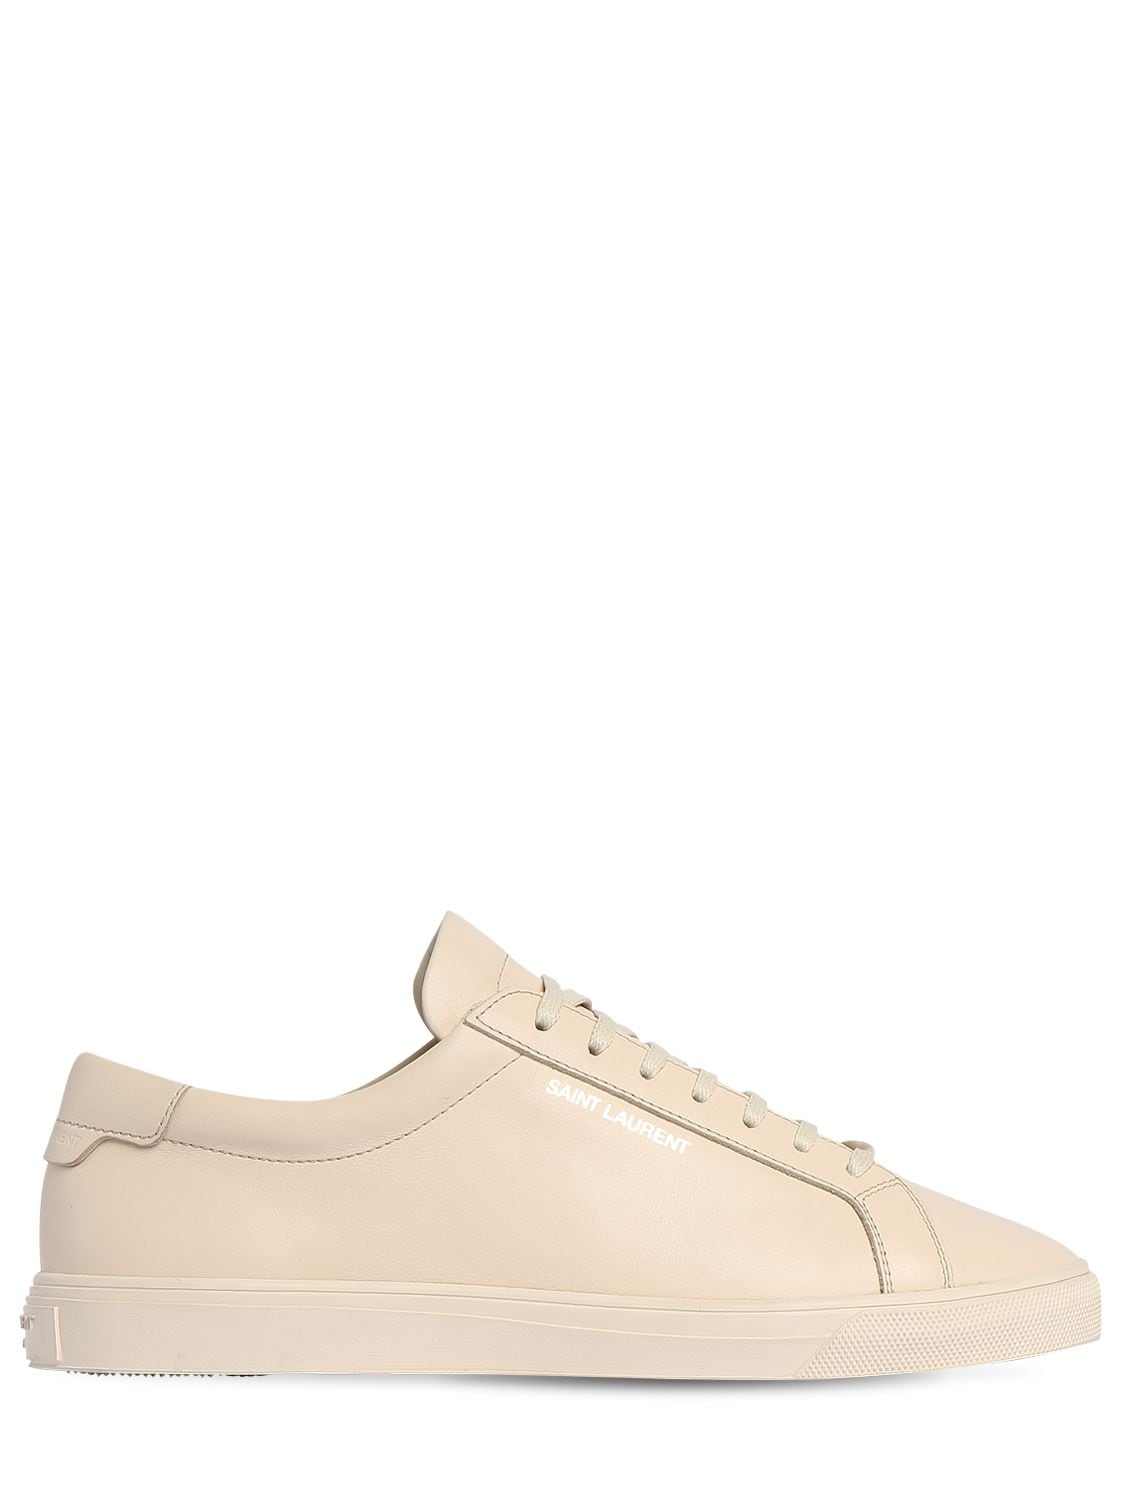 Saint Laurent 20mm Andy Leather Lace-up Sneakers In Nude